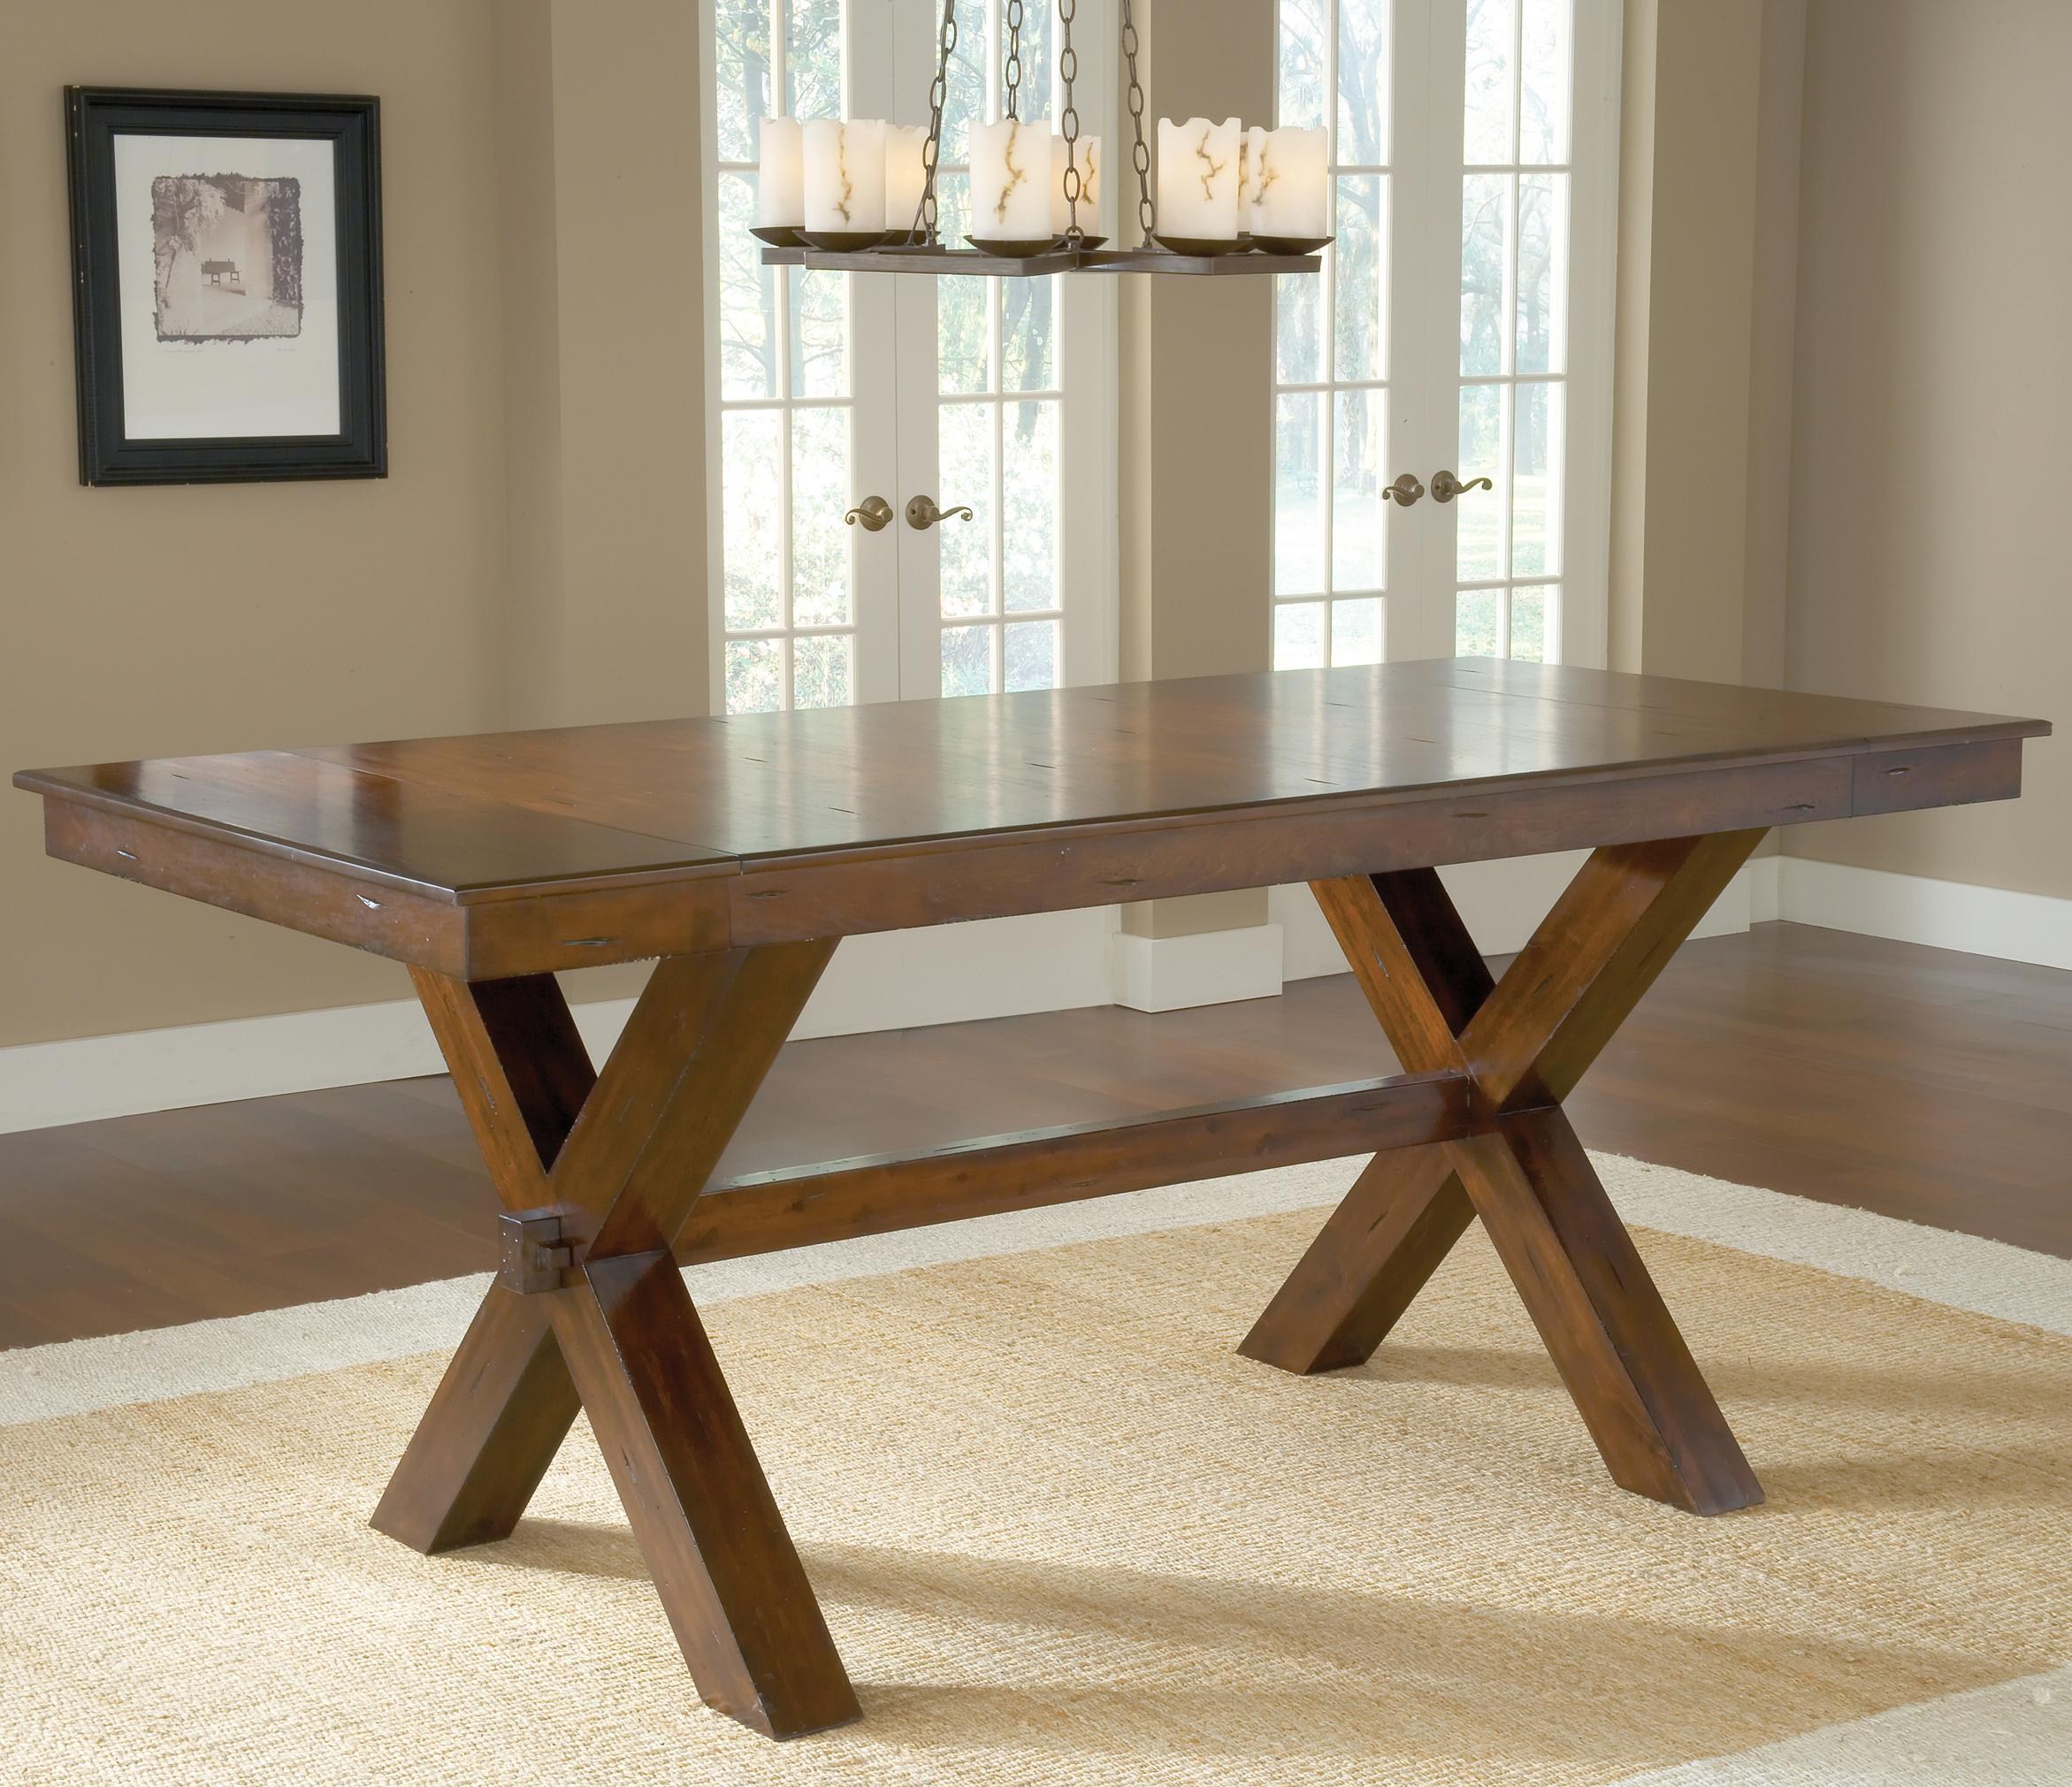 Trestle Table: A Great Investment